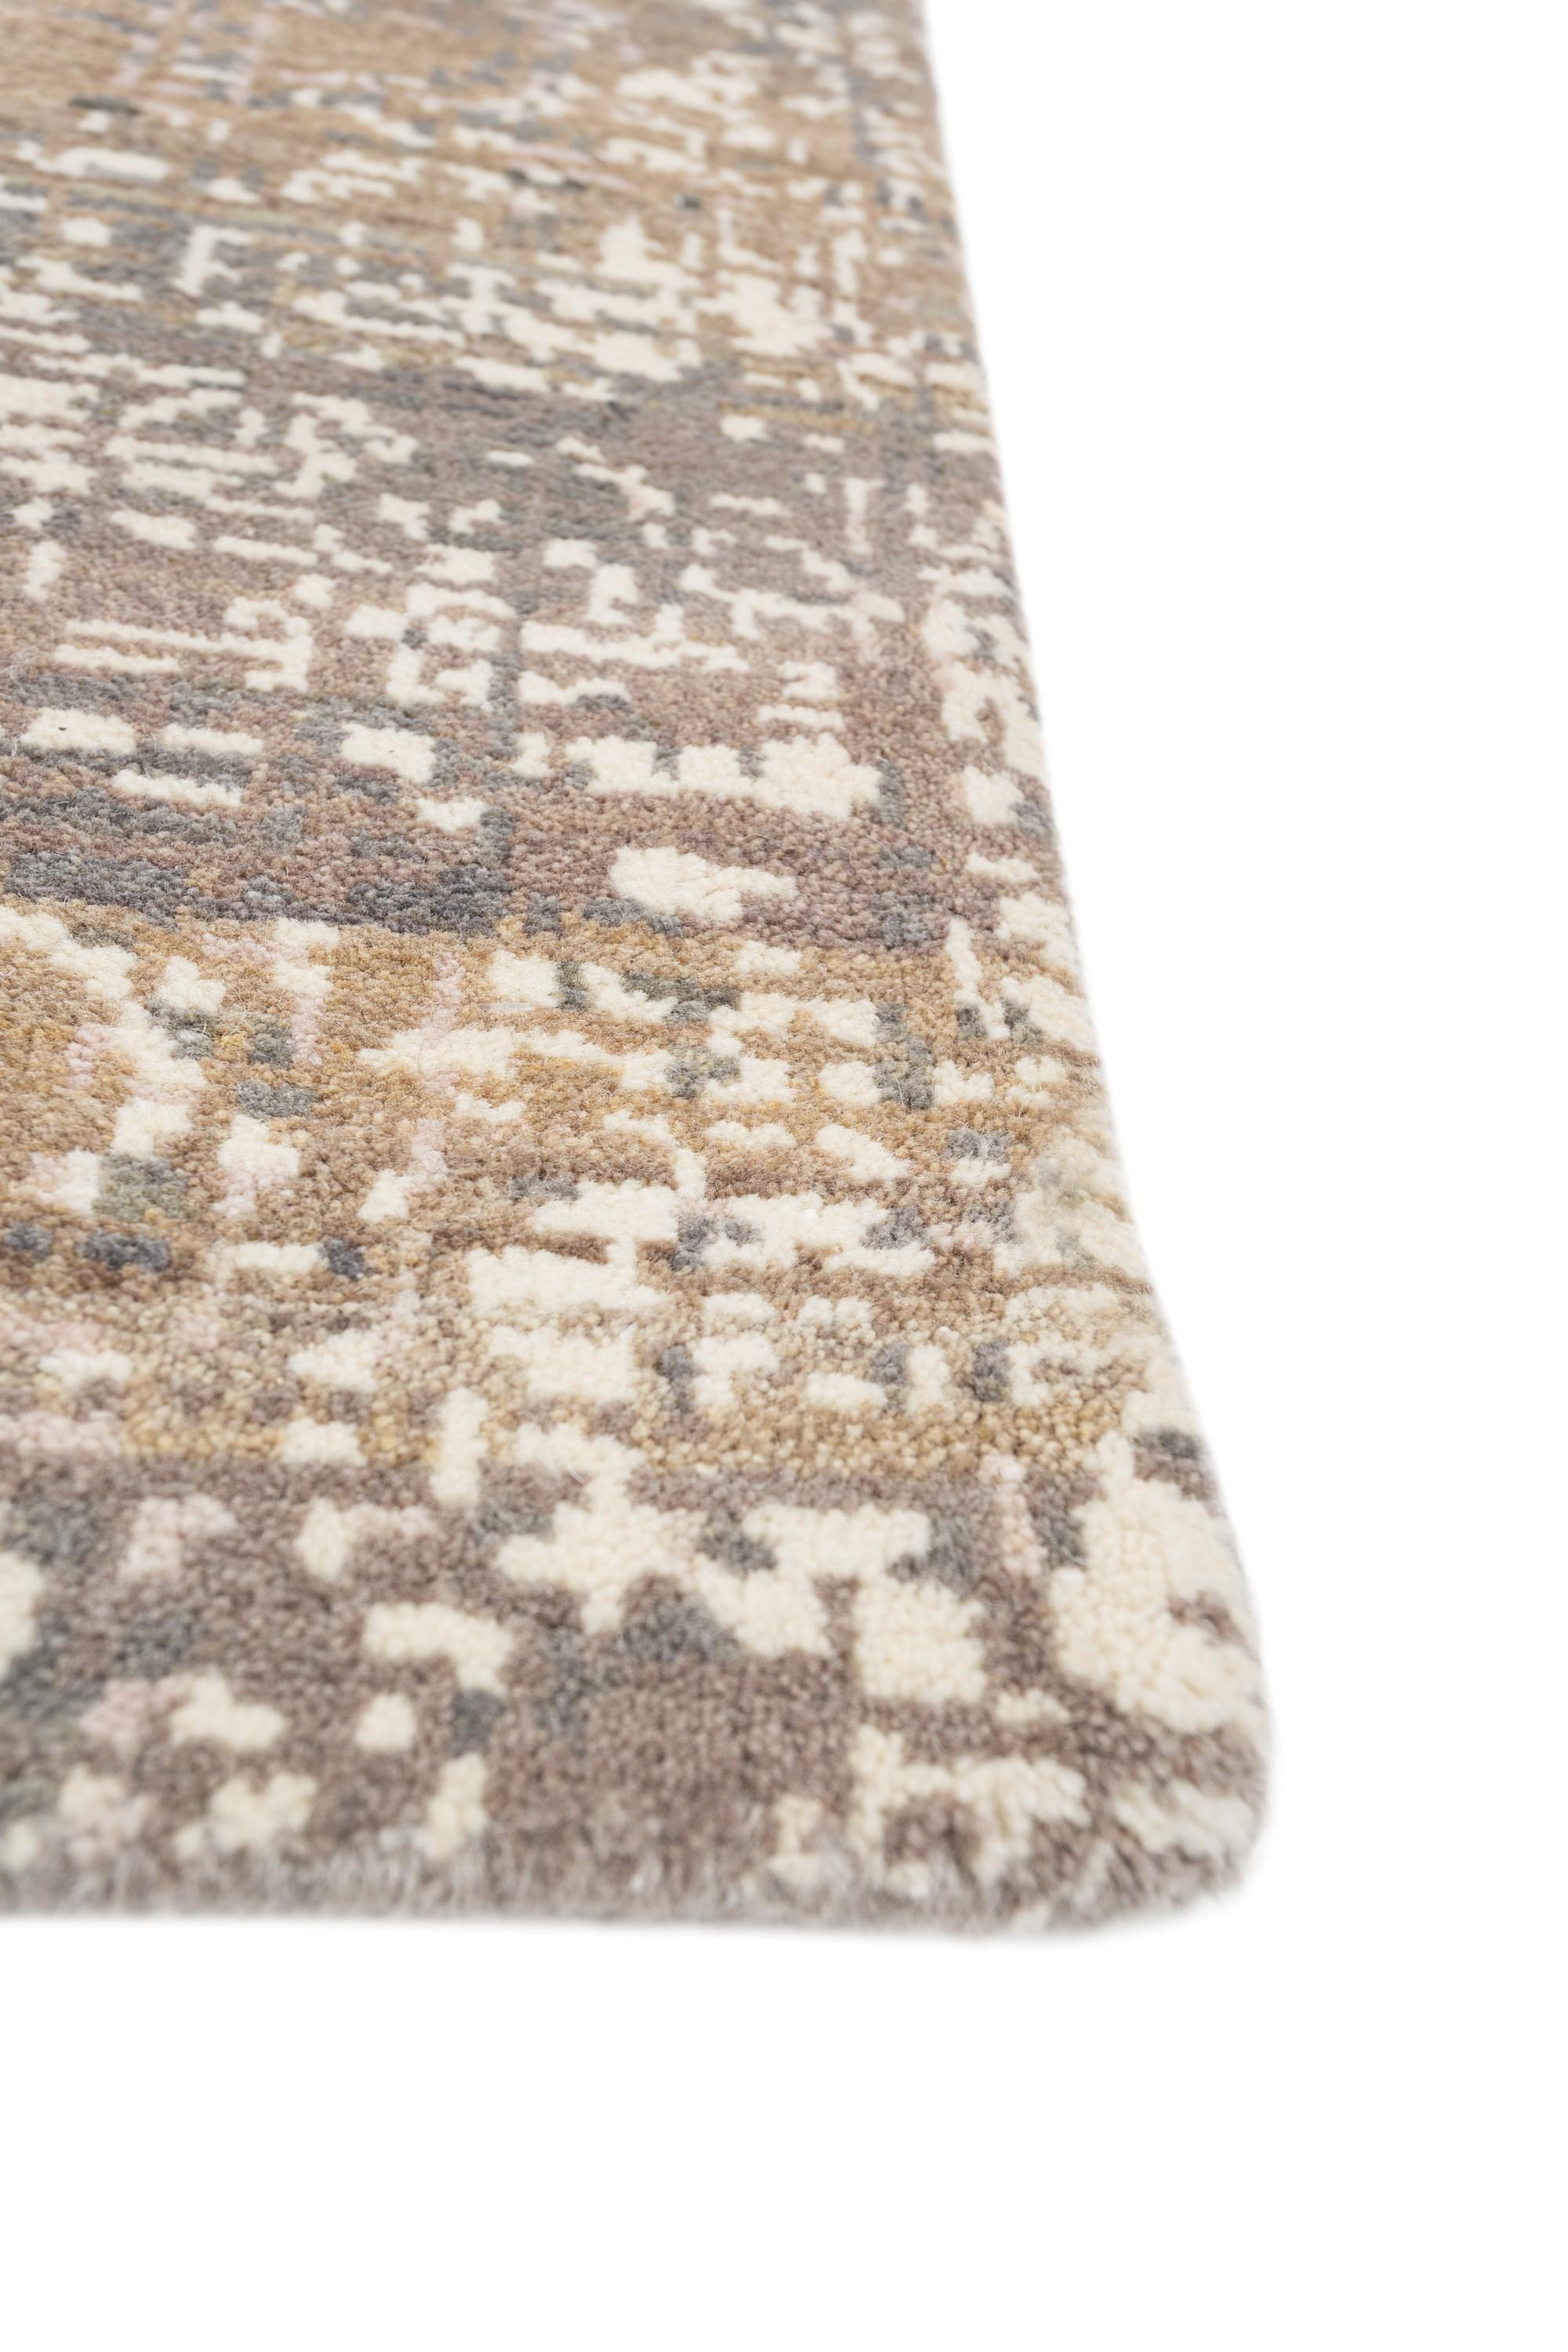 Embark on a journey of tactile refinement with this stunning wool rug from our Uvenuti collection. The highlight of this rug is its distinctive grainy pattern, reminiscent of life's intricate complexities that, when woven together, create a stunning